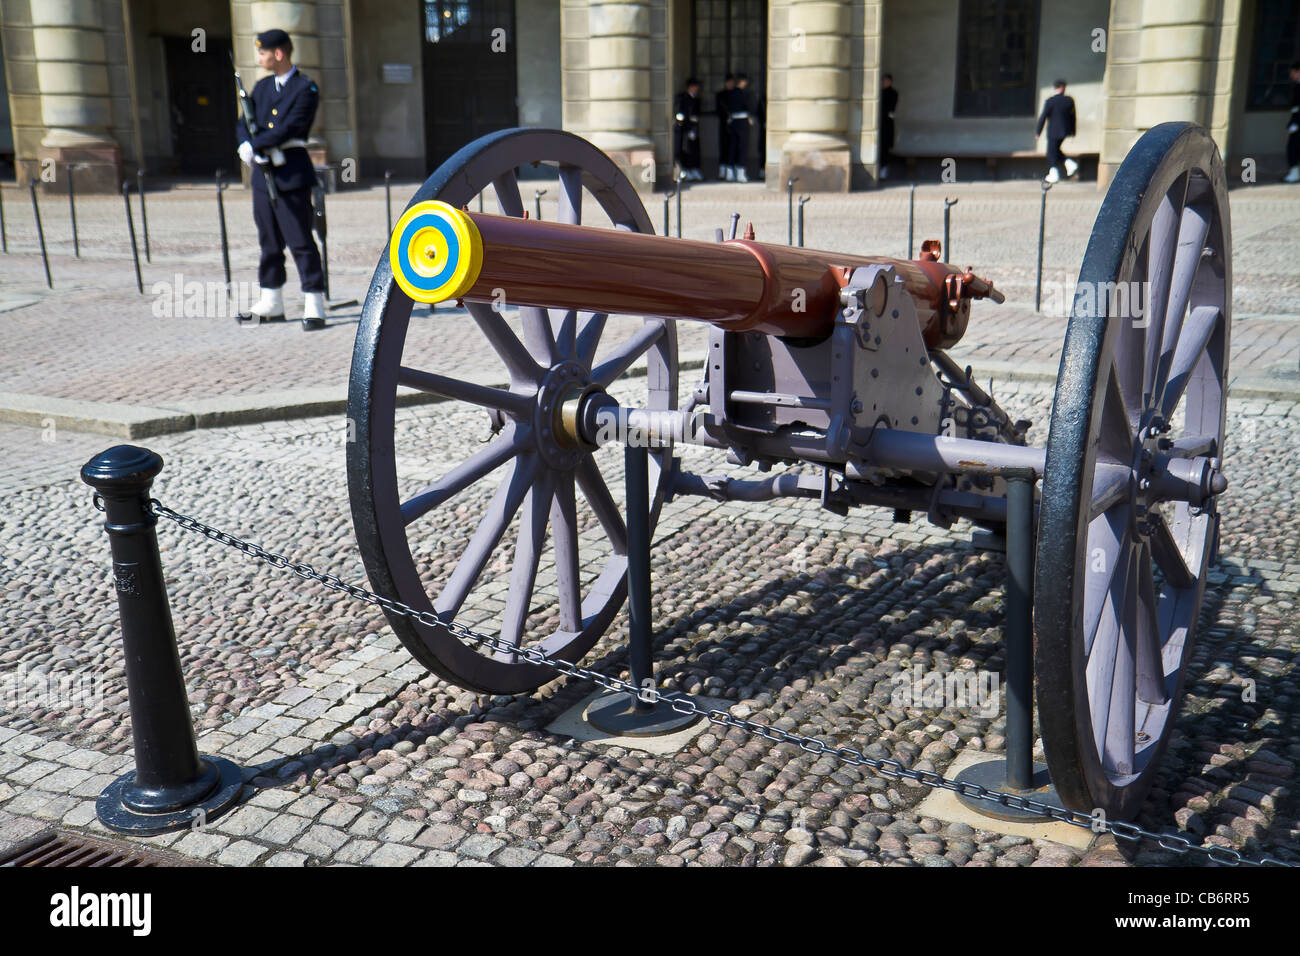 Canon and royal guards in gamla Stockholm Stock Photo